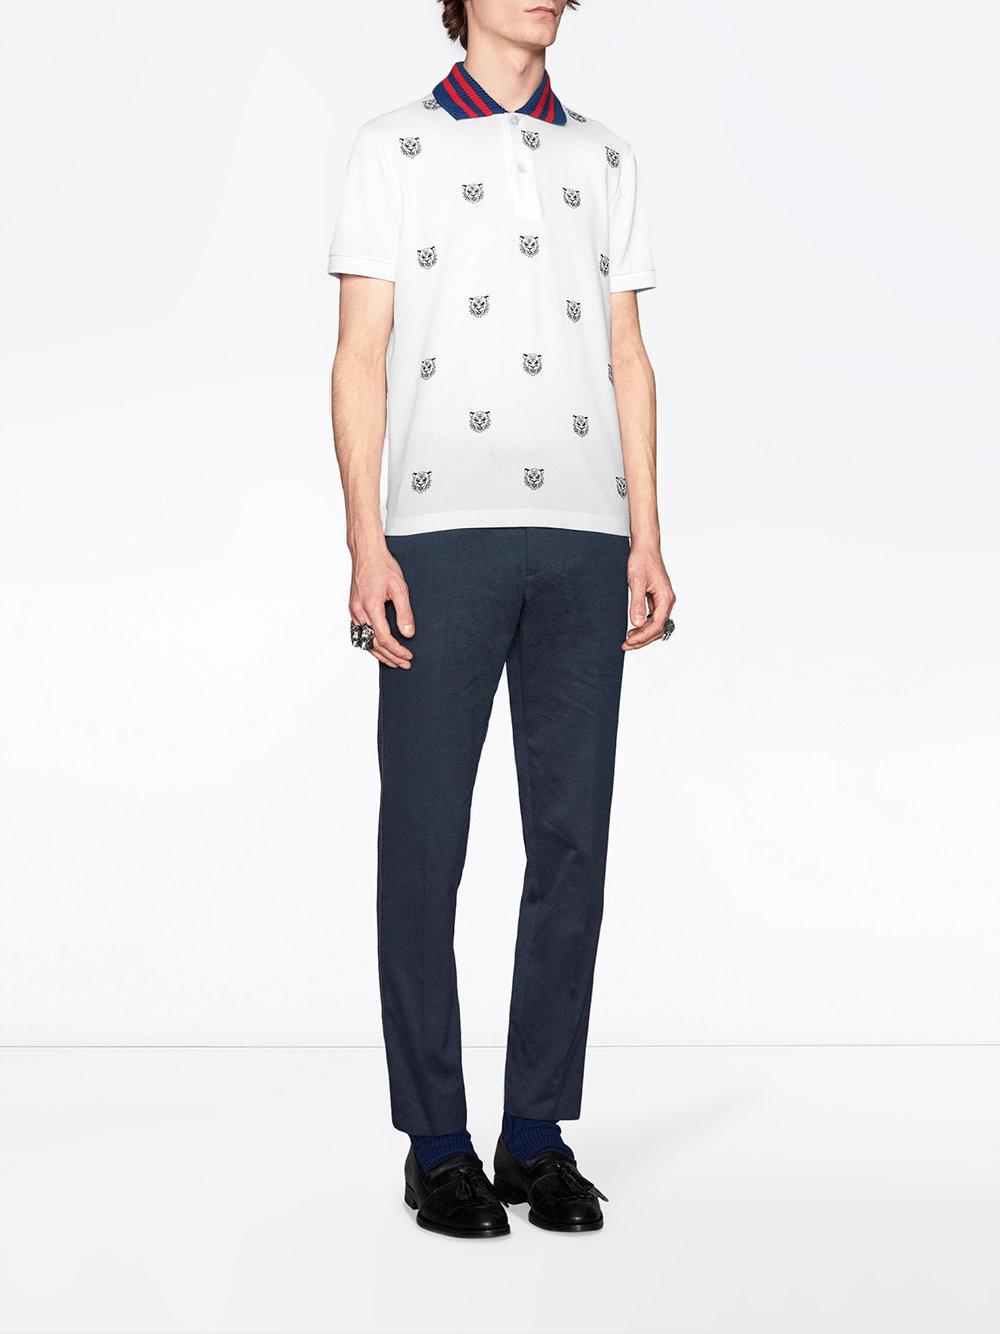 i går sfærisk Gå ud Gucci Cotton Polo With Tiger Head Embroidery in White for Men - Lyst